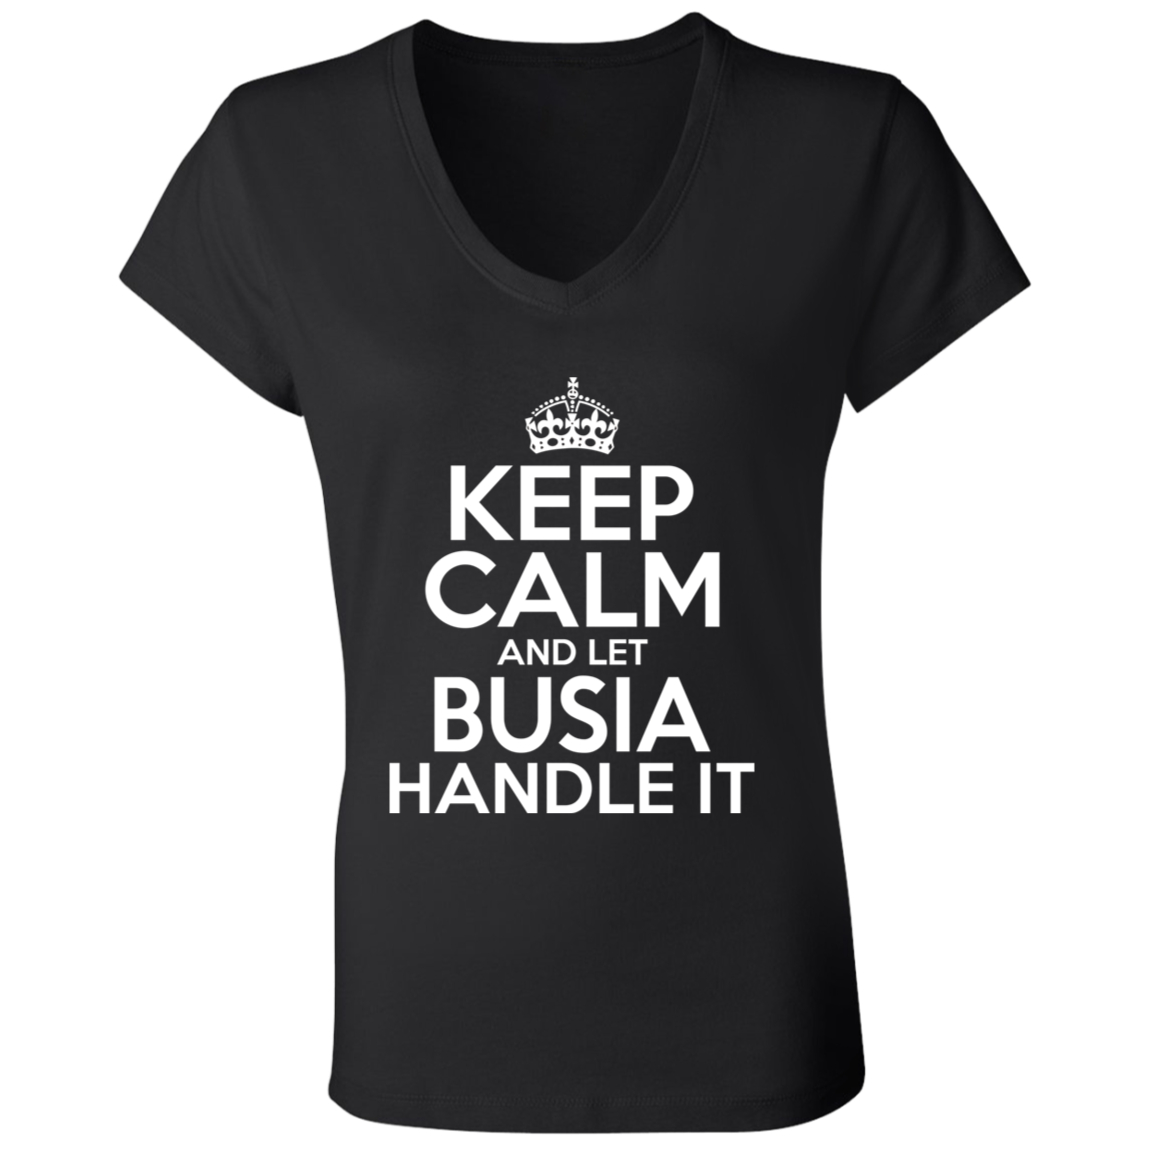 Keep Calm And Let Busia Handle It Apparel CustomCat B6005 Ladies' Jersey V-Neck T-Shirt Black S